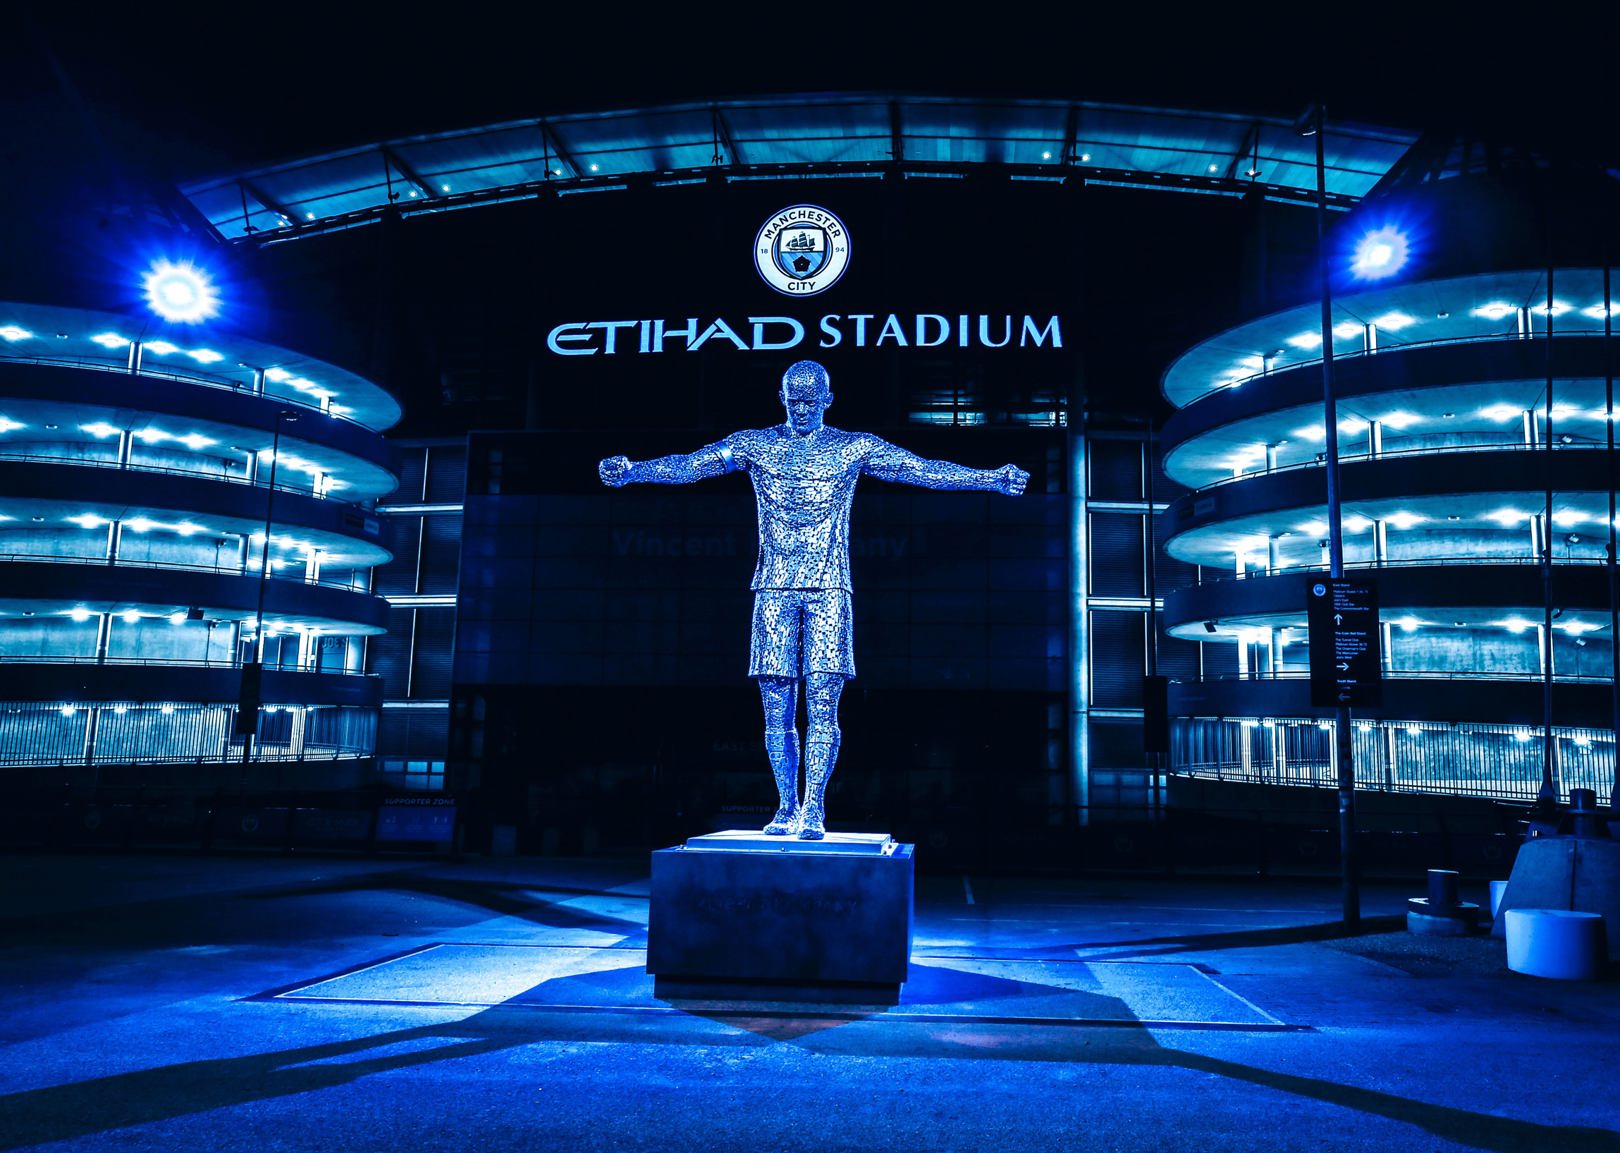 City unveil statues of Kompany and Silva to the world 